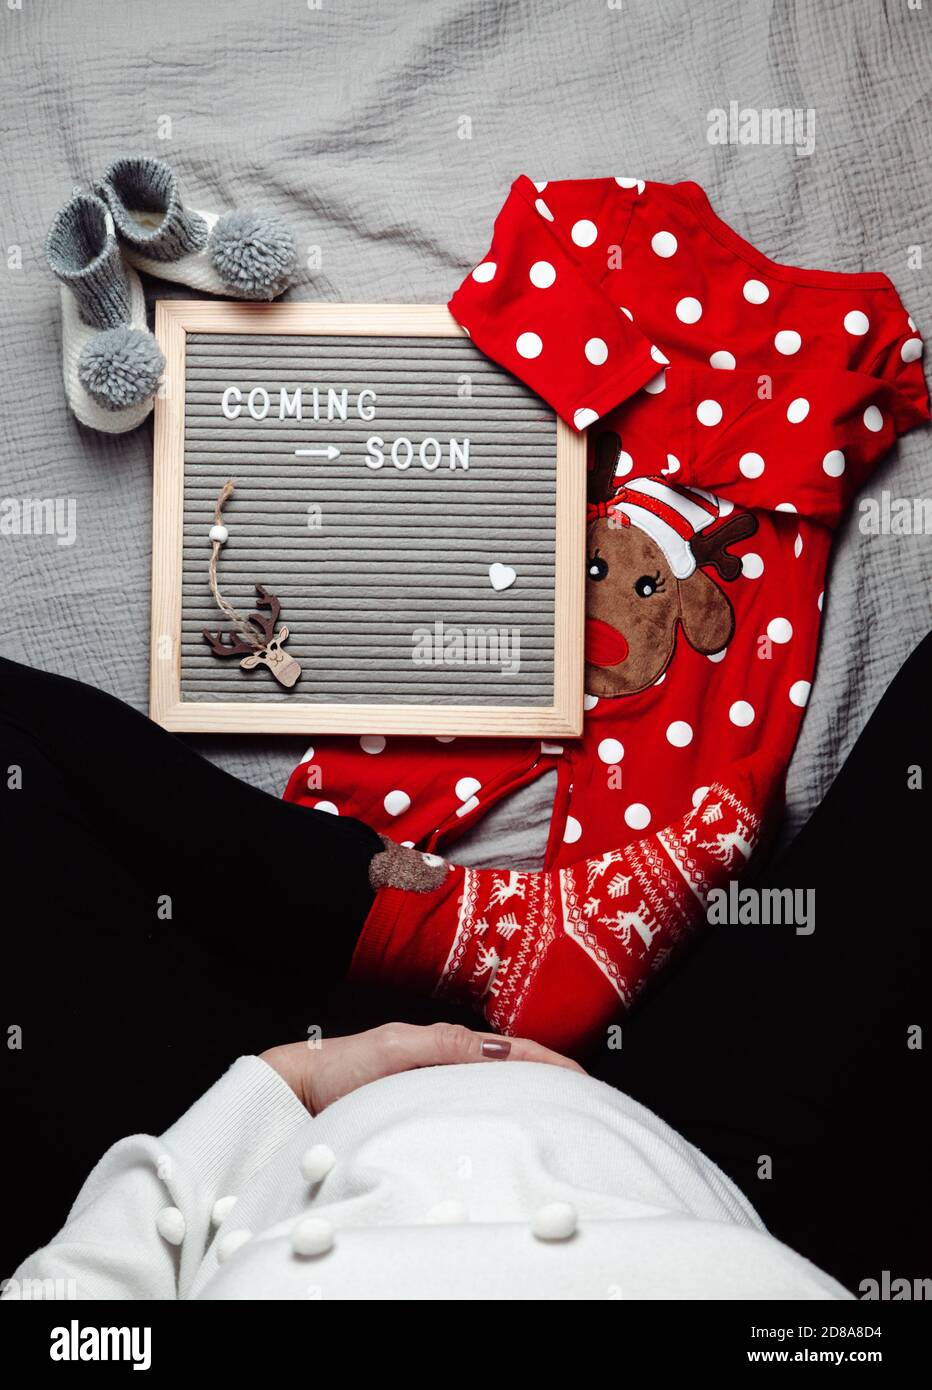 https://c8.alamy.com/comp/2D8A8D4/pregnant-woman-sitting-with-a-coming-soon-baby-announcement-sign-coming-soon-christmas-concept-pregnancy-belly-blank-space-2D8A8D4.jpg